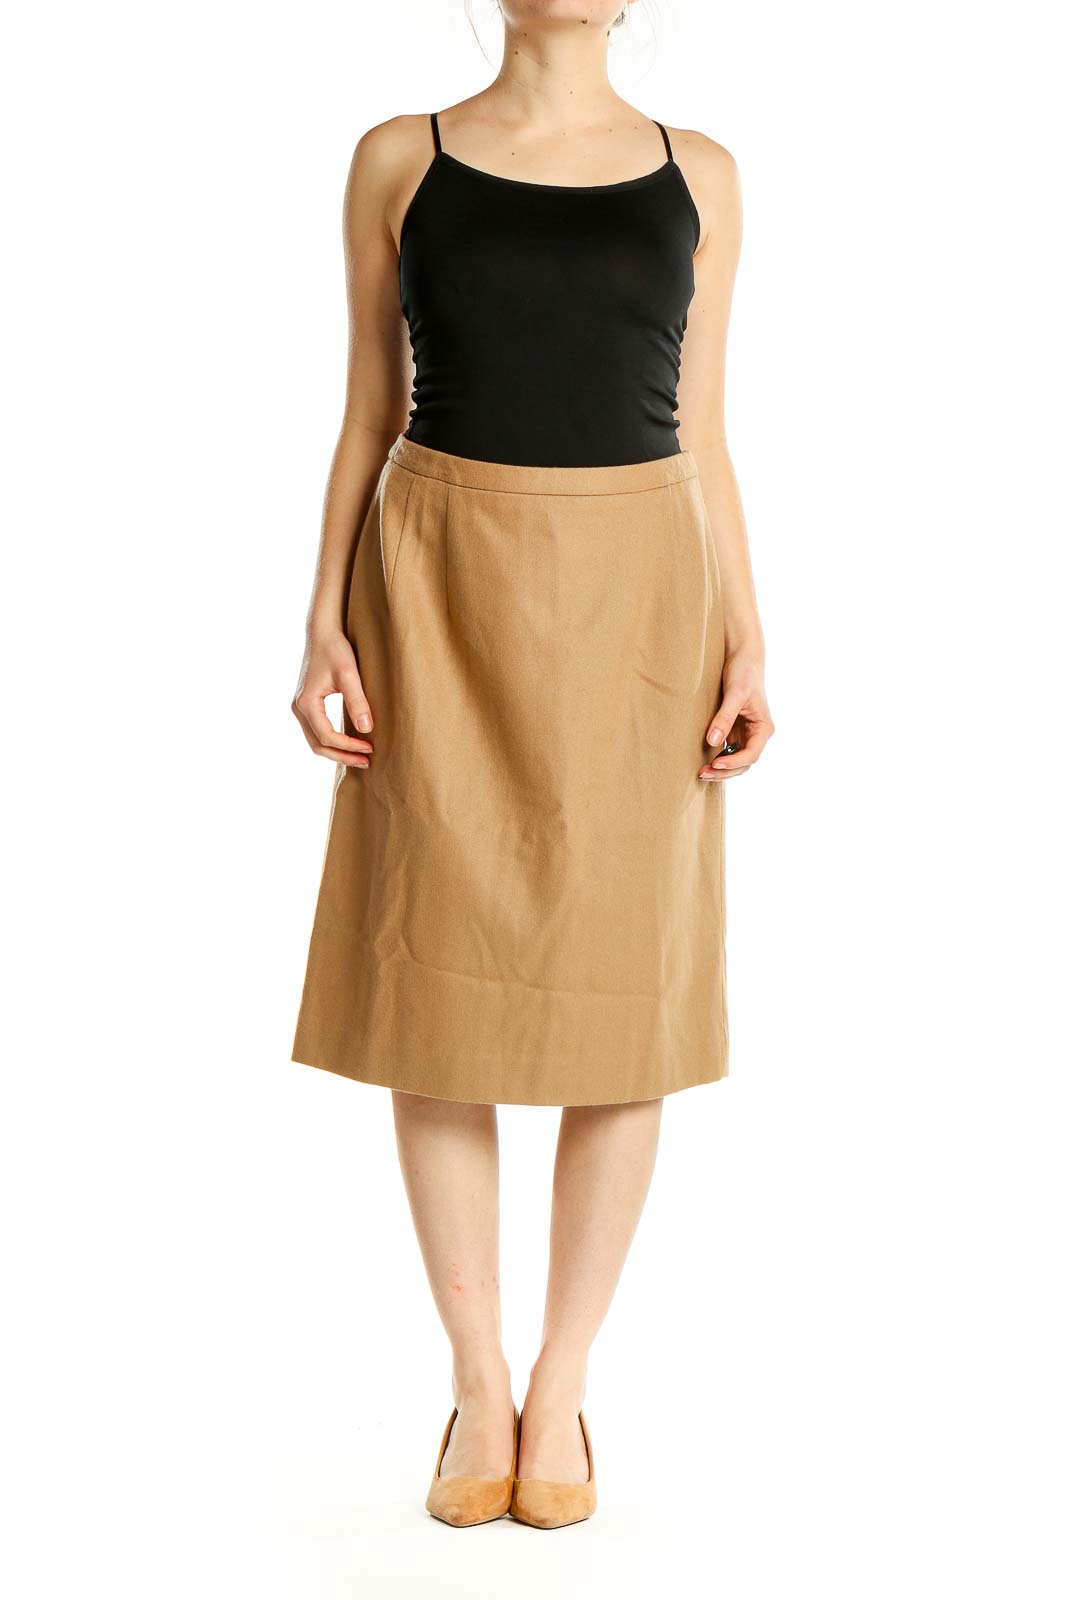 Shop Skirts With Points or Cash | SilkRoll